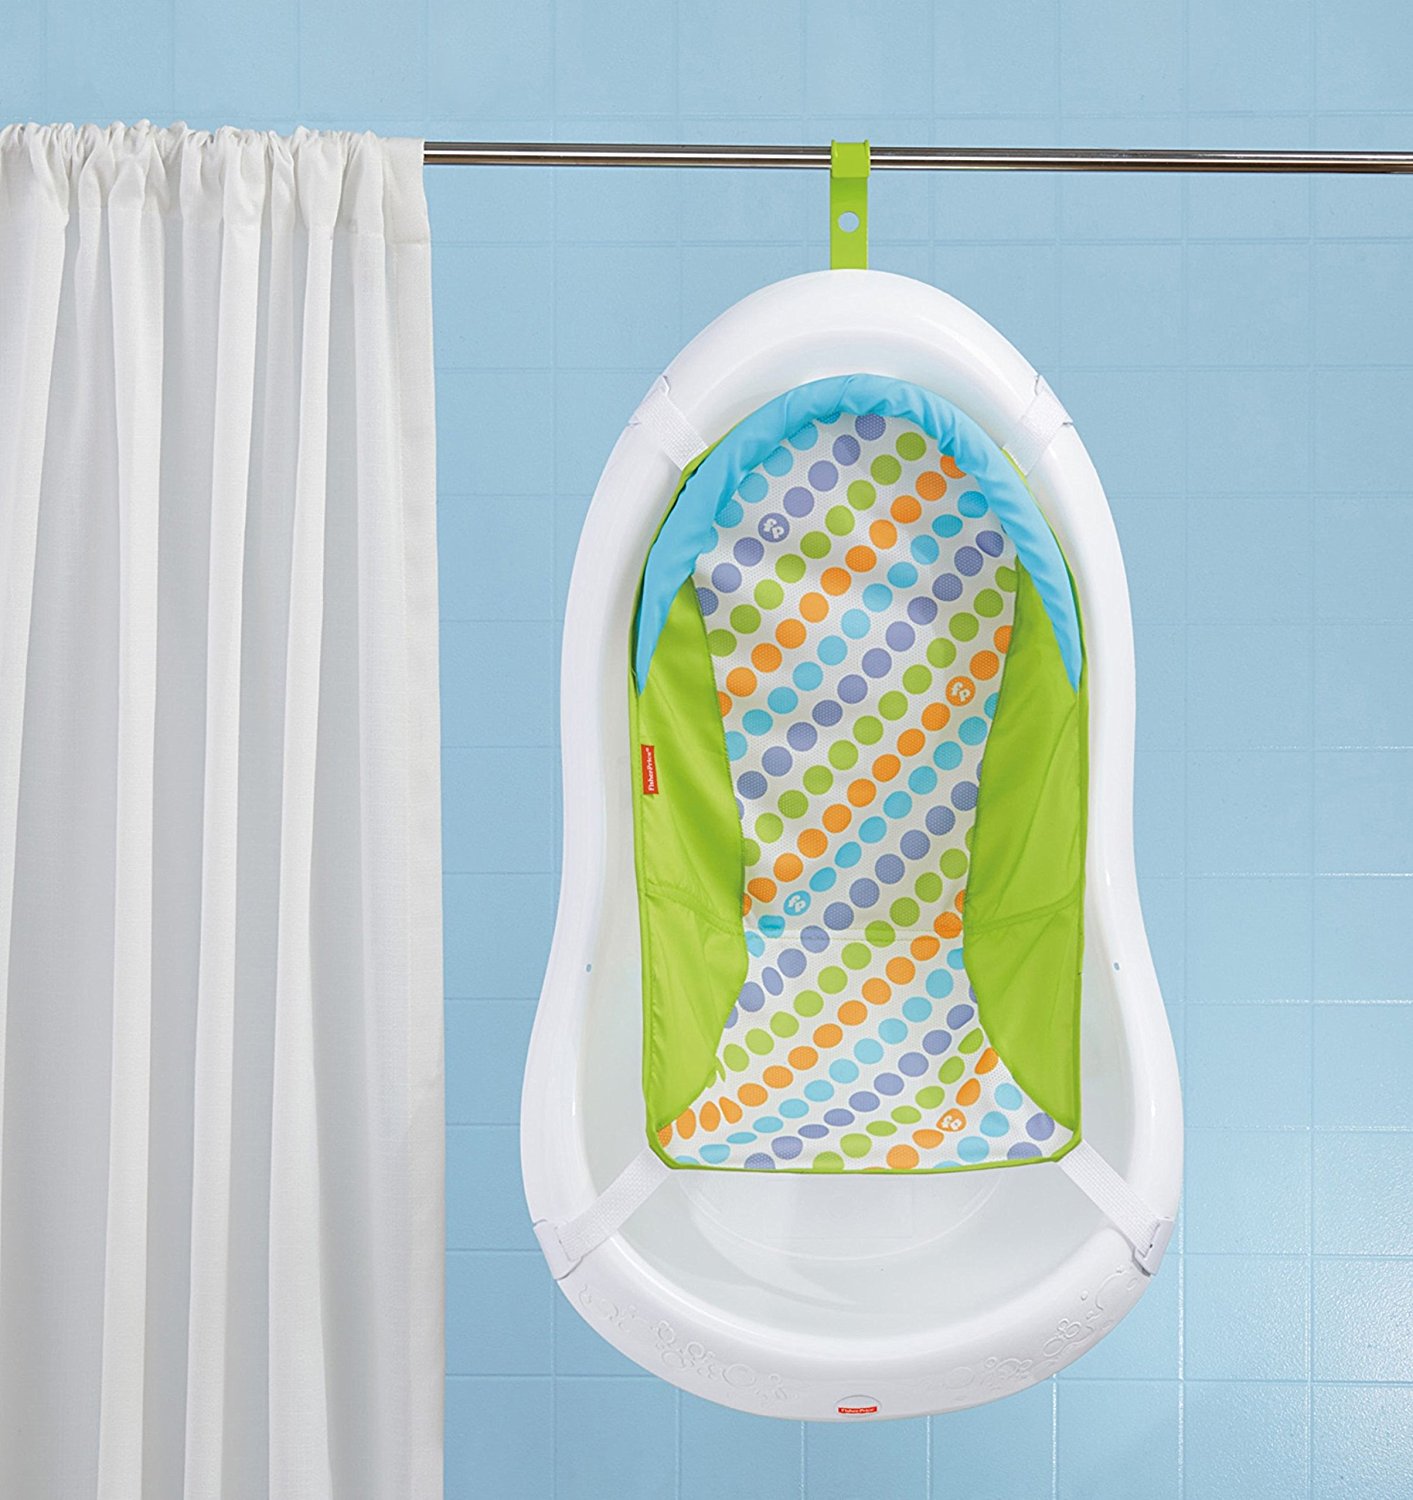 Fisher-Price 4-in-1 Sling N Seat Tub hanging from shower to dry